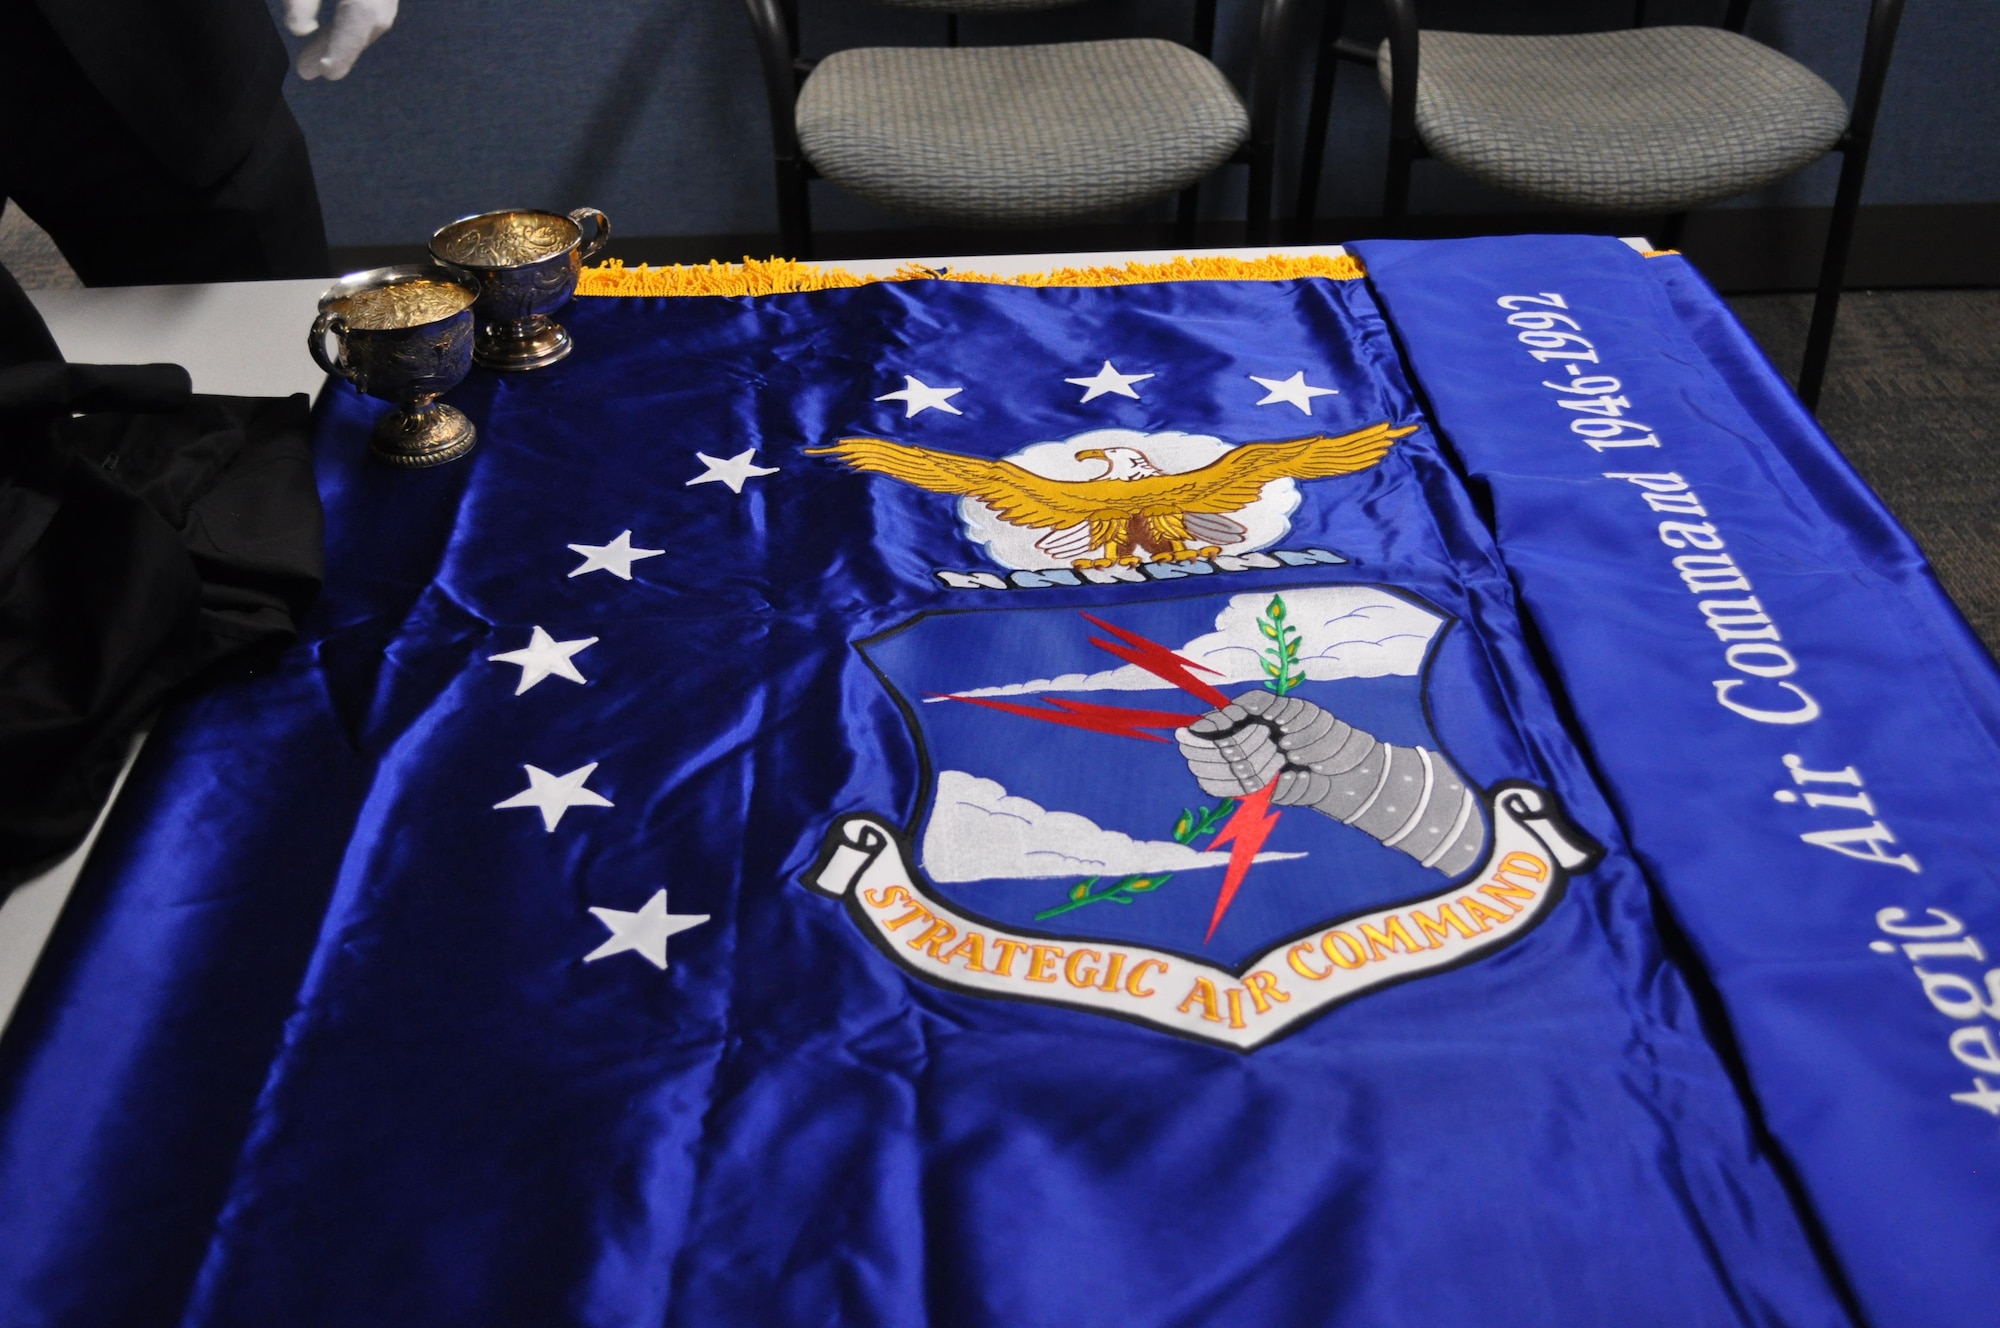 Strategic Air Command’s standard lies folded in the new Global Strike Research Facility, which is the new home of Air Force Global Strike Command’s Office of the Command Historian. The dates 1946-1992 mark the activation and deactivation dates of this command. During its term of service, SAC stood ready as the primary source of strategic deterrence for the nation, according to Command Historian Yancy Mailes (Air Force Photo by Joe K. Thomas, Air Force Global Strike Command Public Affairs).